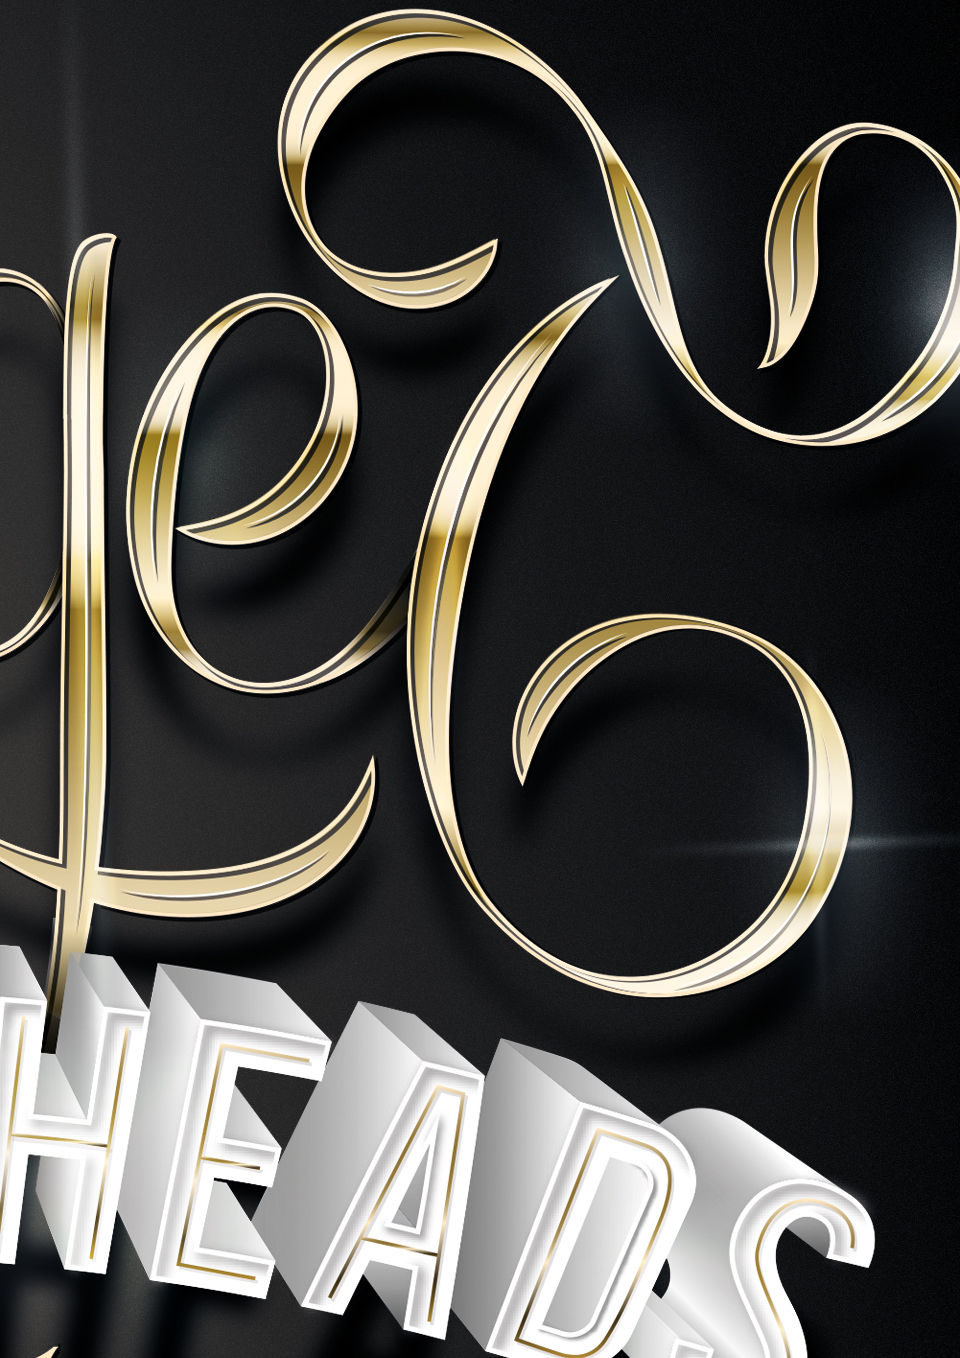 lettering type Calligrphy 3dlettering 3D graphicdesign design gold black White typedesign typographer